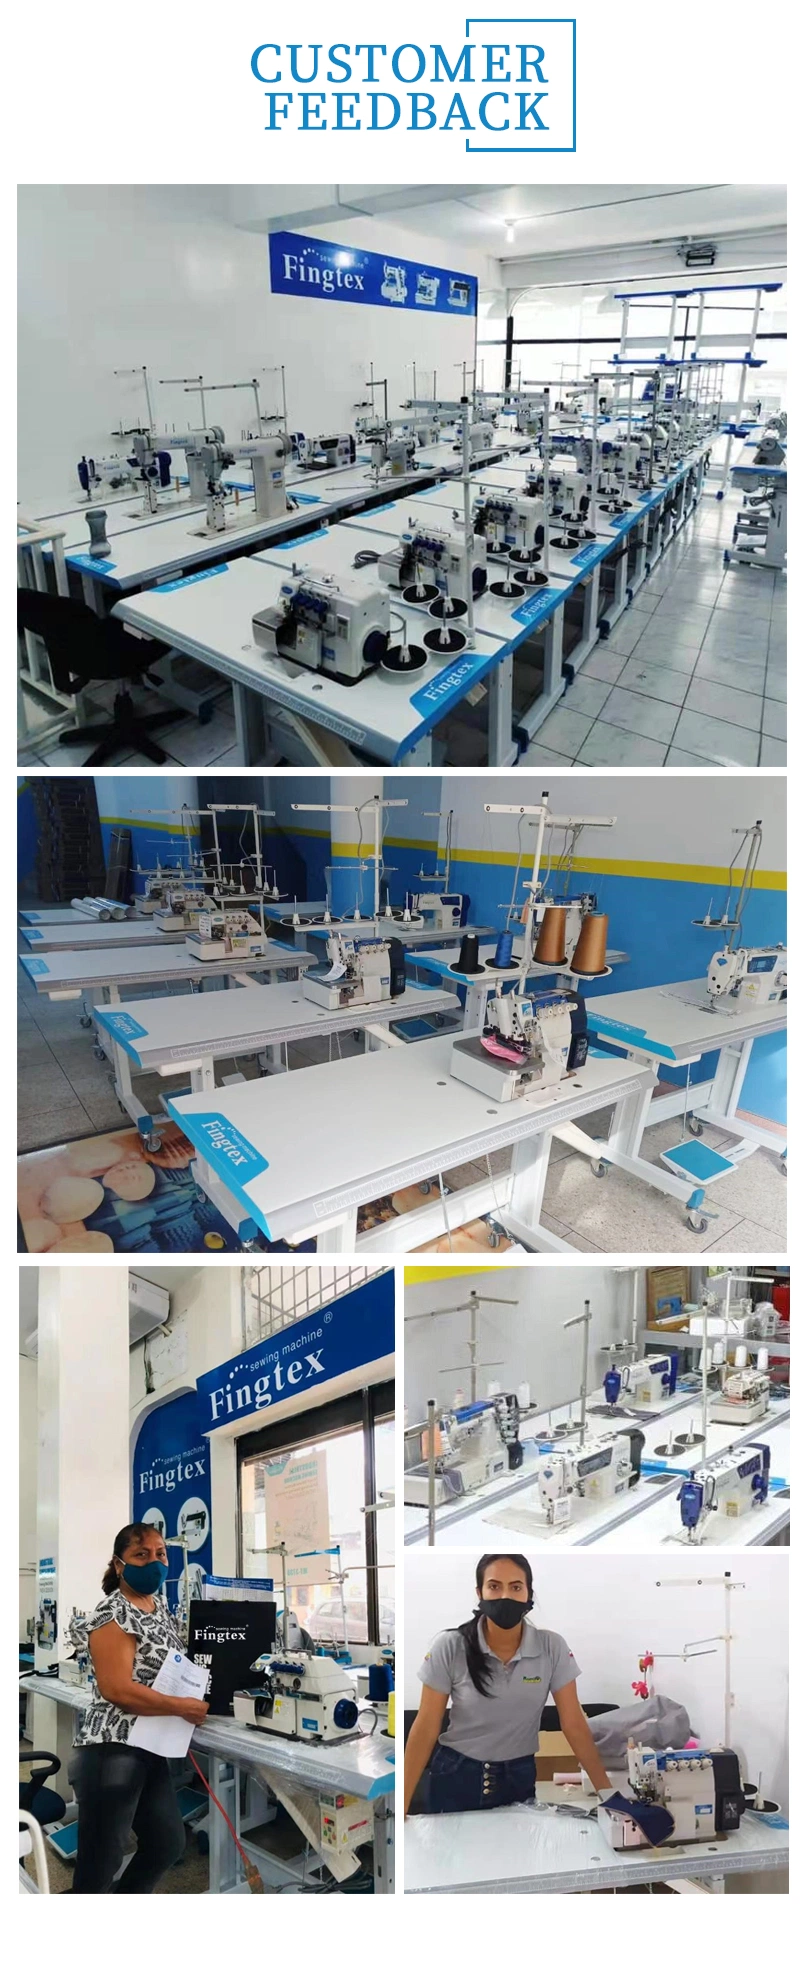 Computerized All-Auto Overlock Sewing Machinery with Upper&Lower Differential Feed